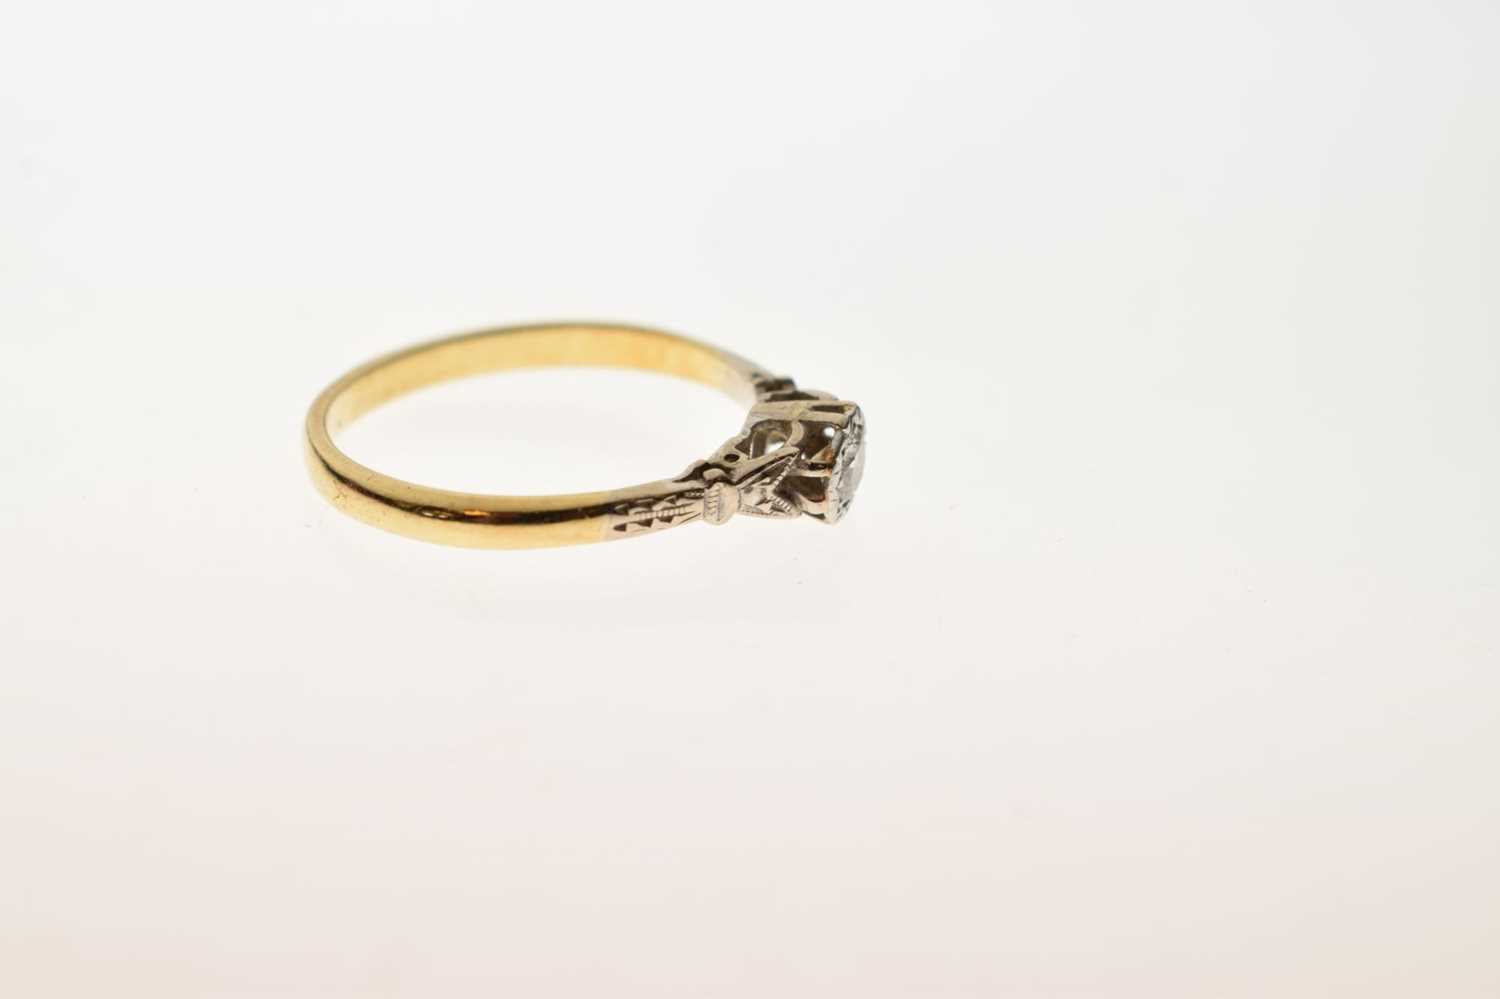 Diamond solitaire ring - Image 4 of 5